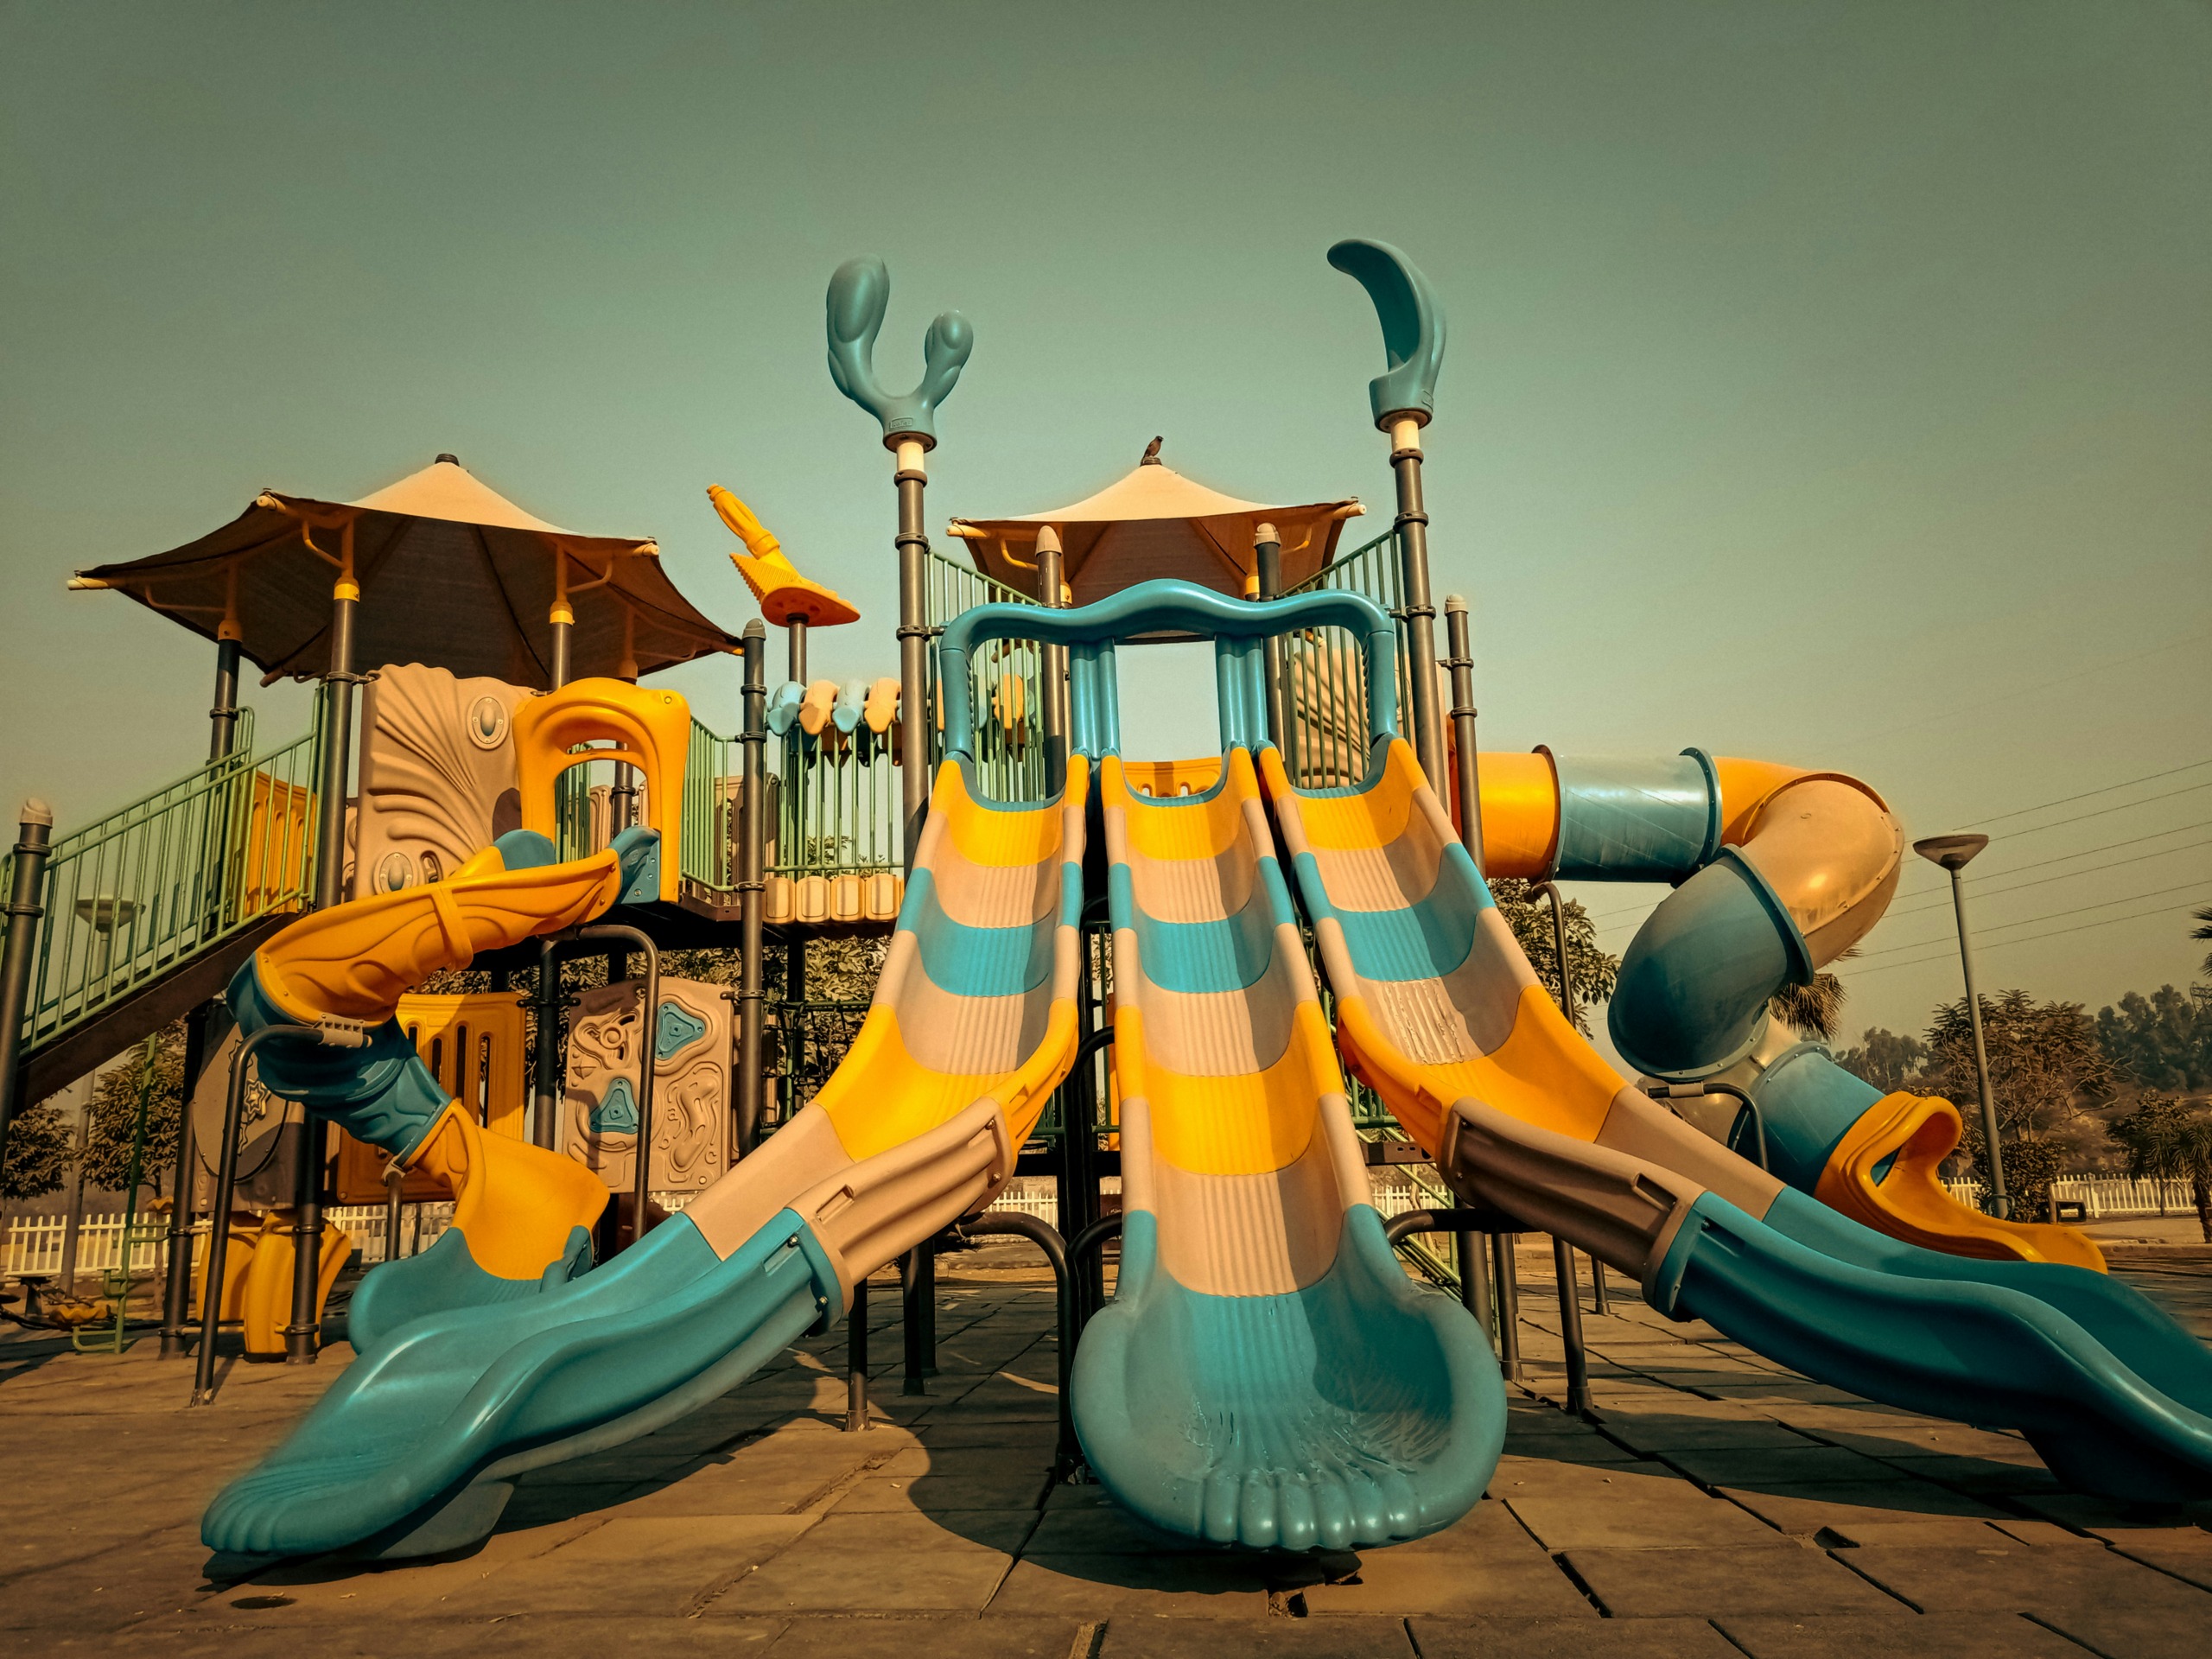 a playground with a slide and play structure | photo by fahim junaid